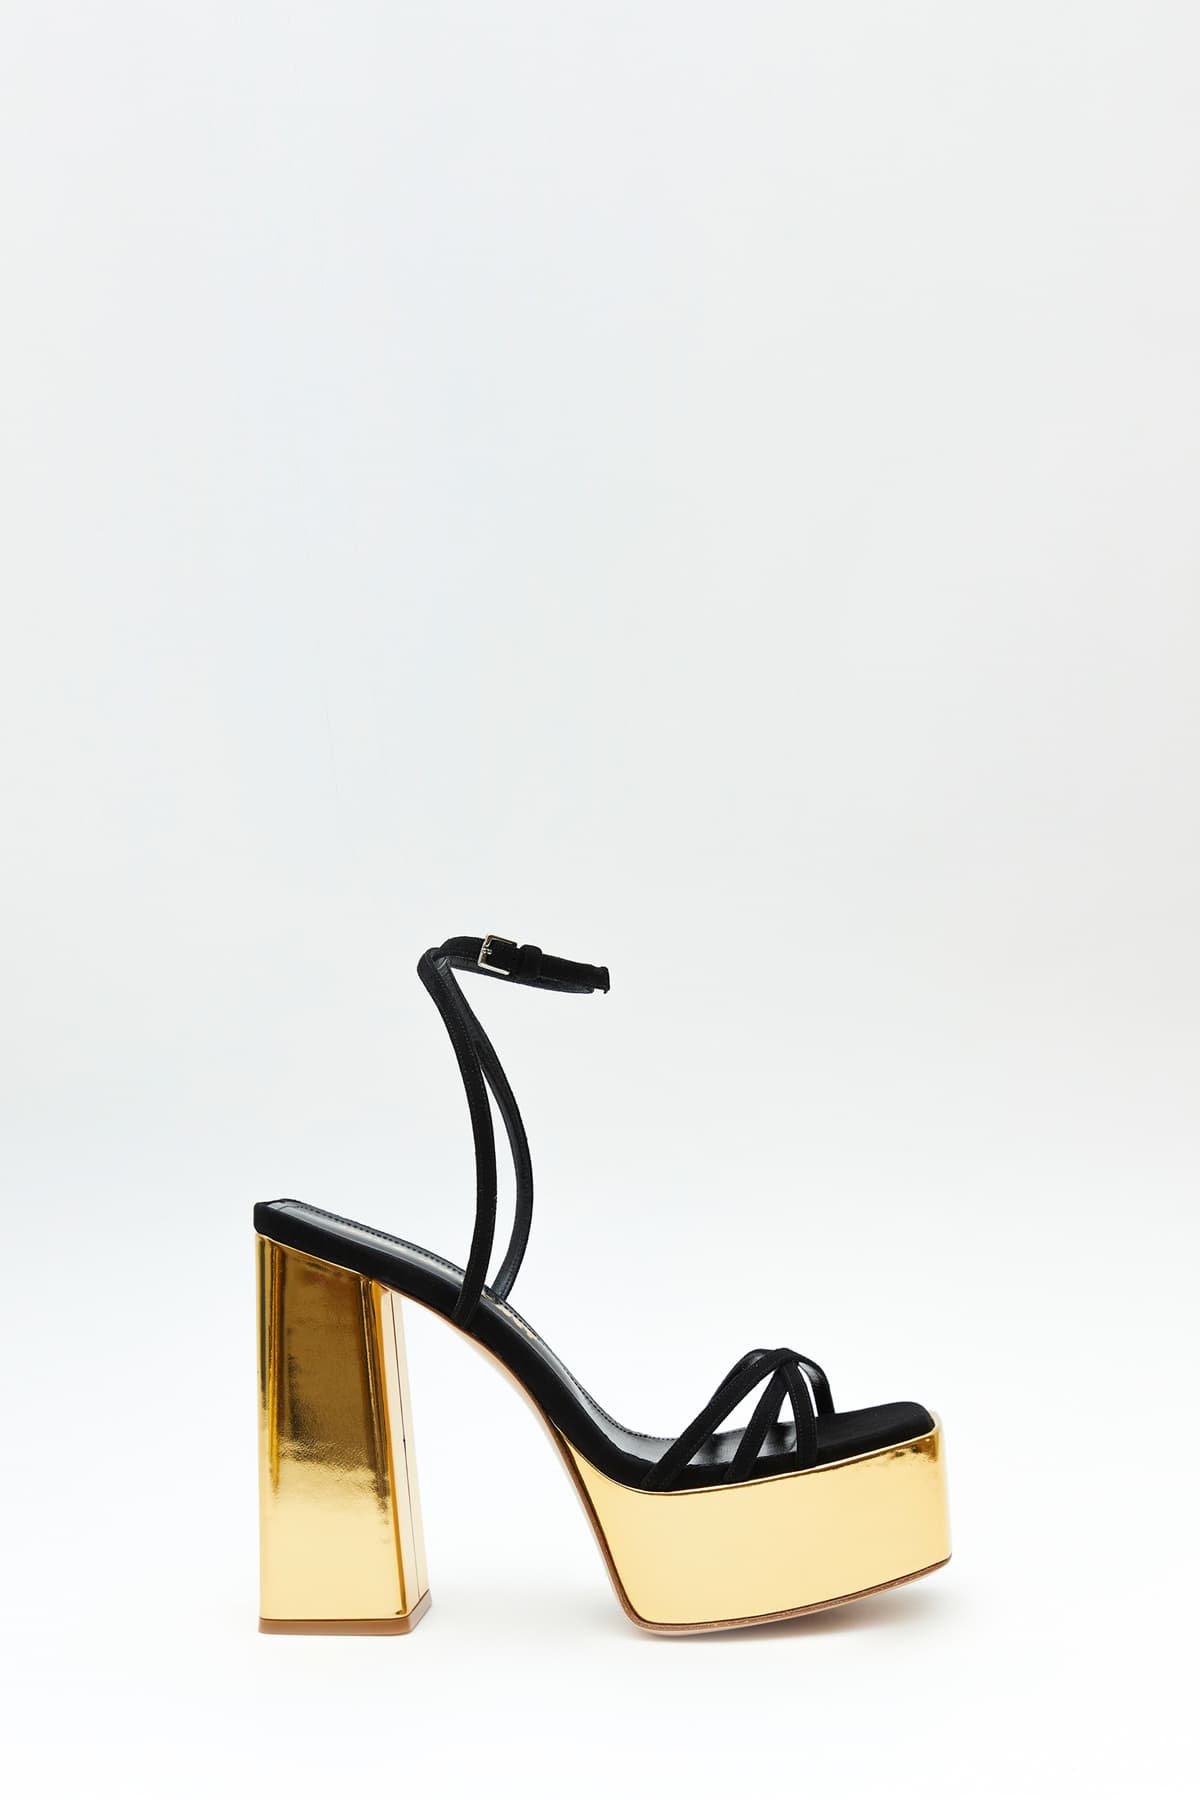 Sideview of The Wannabe sandal in gold and black from the Haus of Honey fall-winter 2023-24